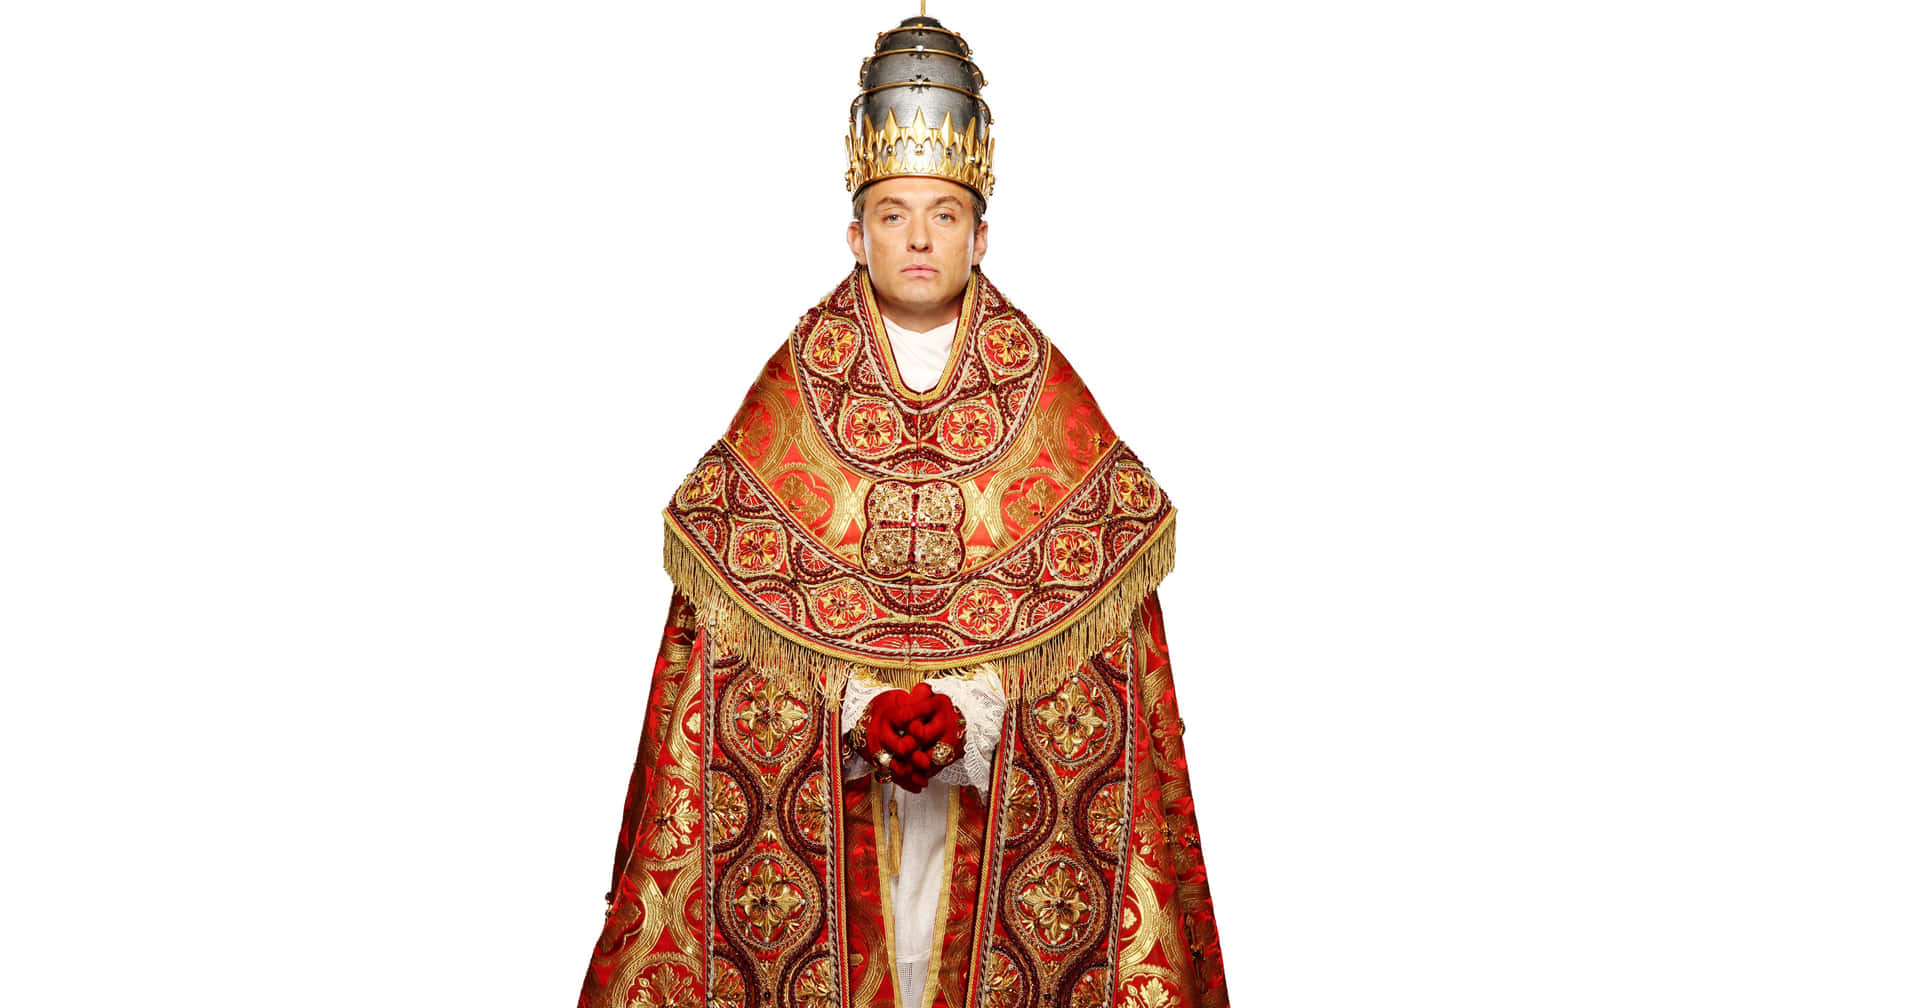 The Young Pope Pius Xiii Deep In Thought Wallpaper